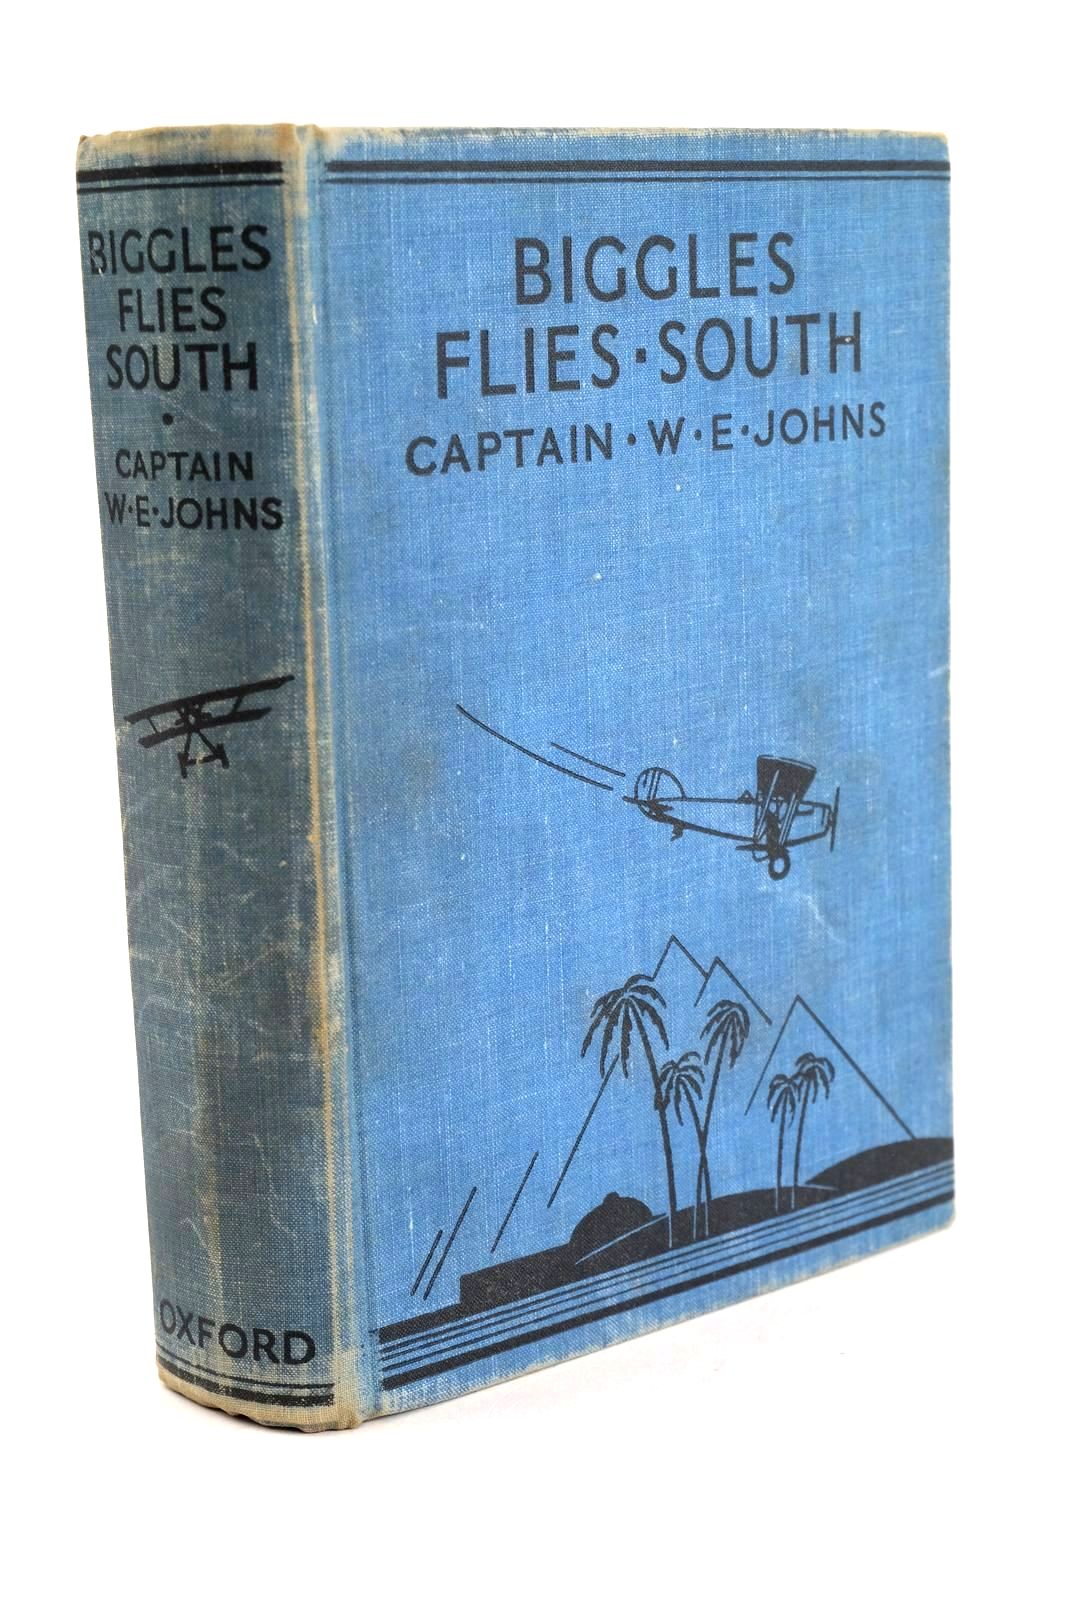 Photo of BIGGLES FLIES SOUTH written by Johns, W.E. illustrated by Leigh, Howard
Nicolle, Jack published by Oxford University Press (STOCK CODE: 1324101)  for sale by Stella & Rose's Books